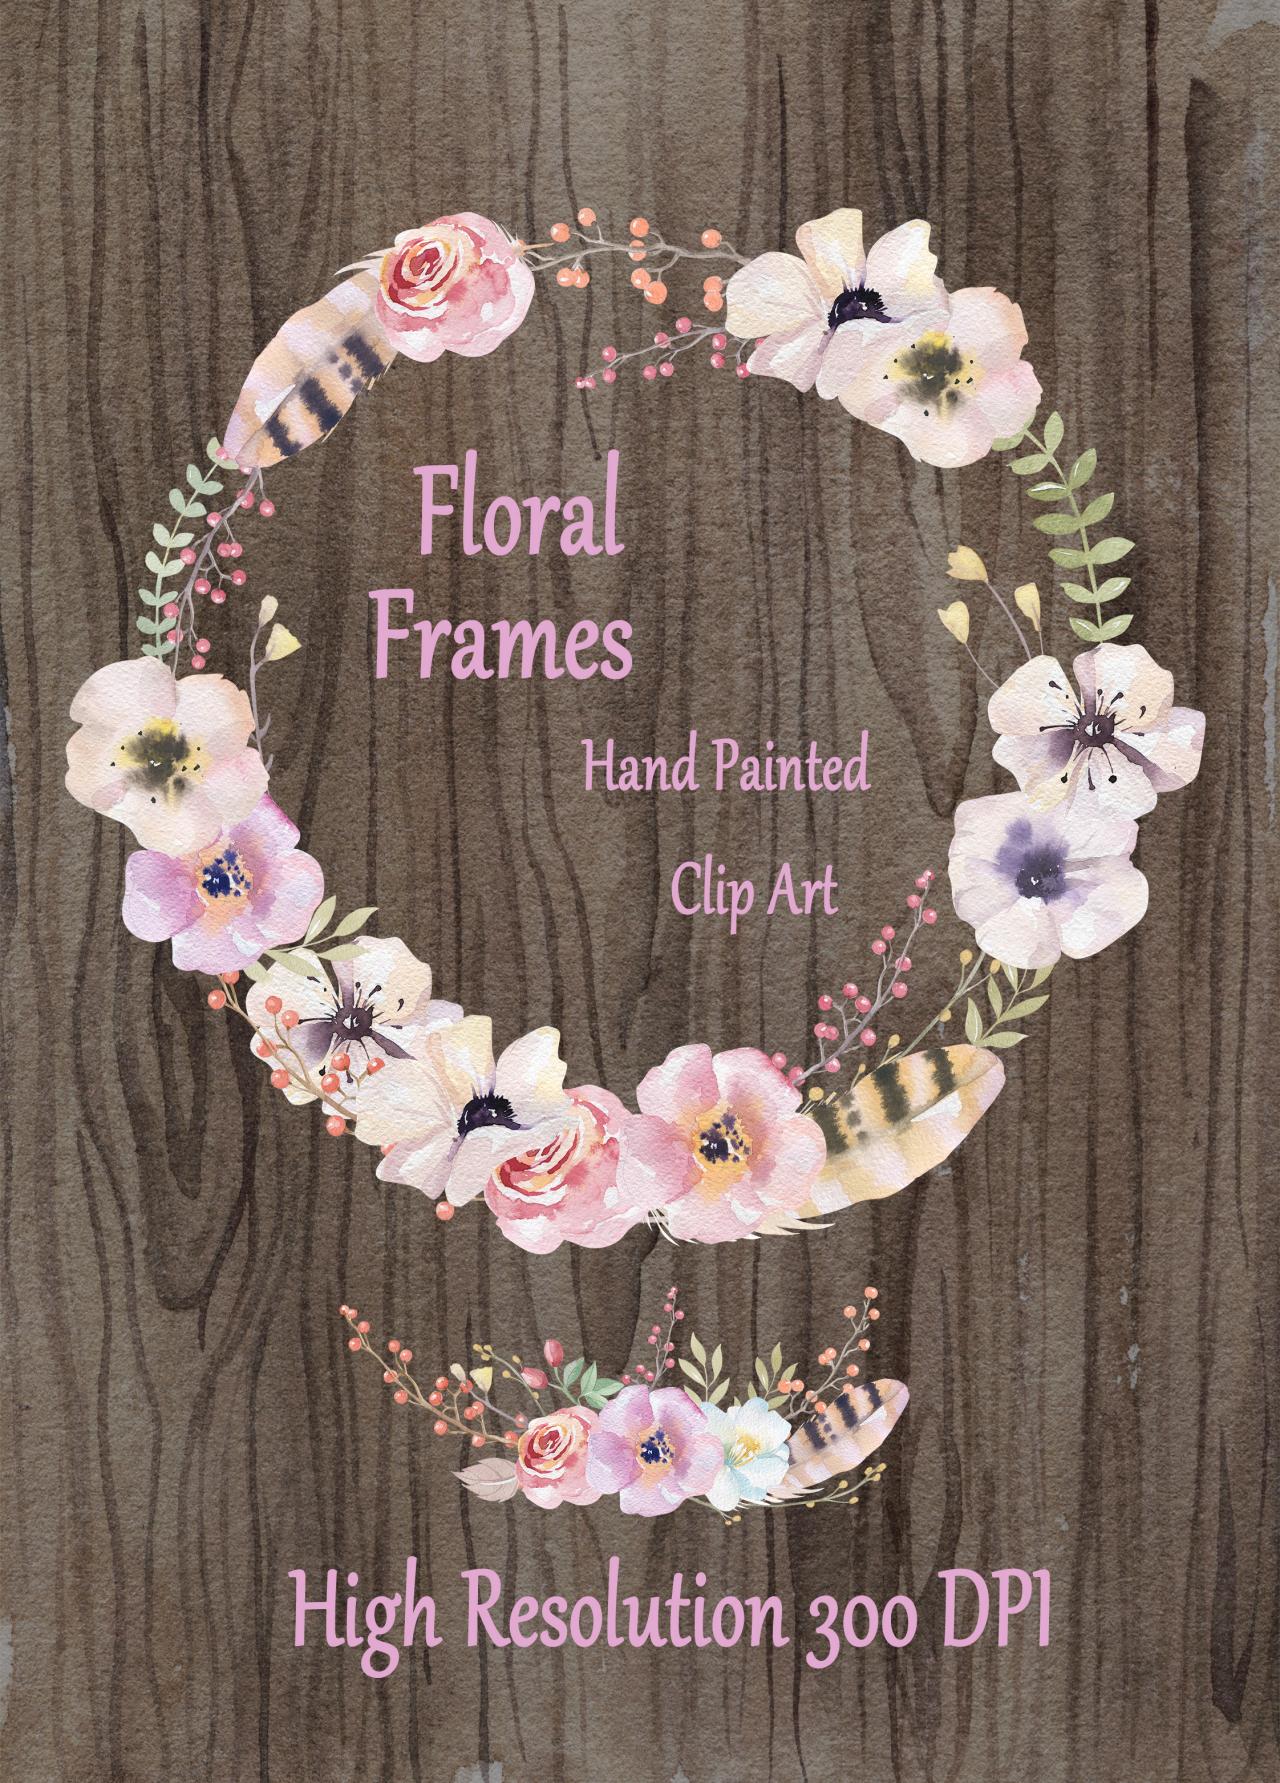 Watercolor Hand Painted Floral Frames Clipart: "floral Wreaths" Pink Flowers Clipart Wedding Clipart Diy Invite Greeting Card